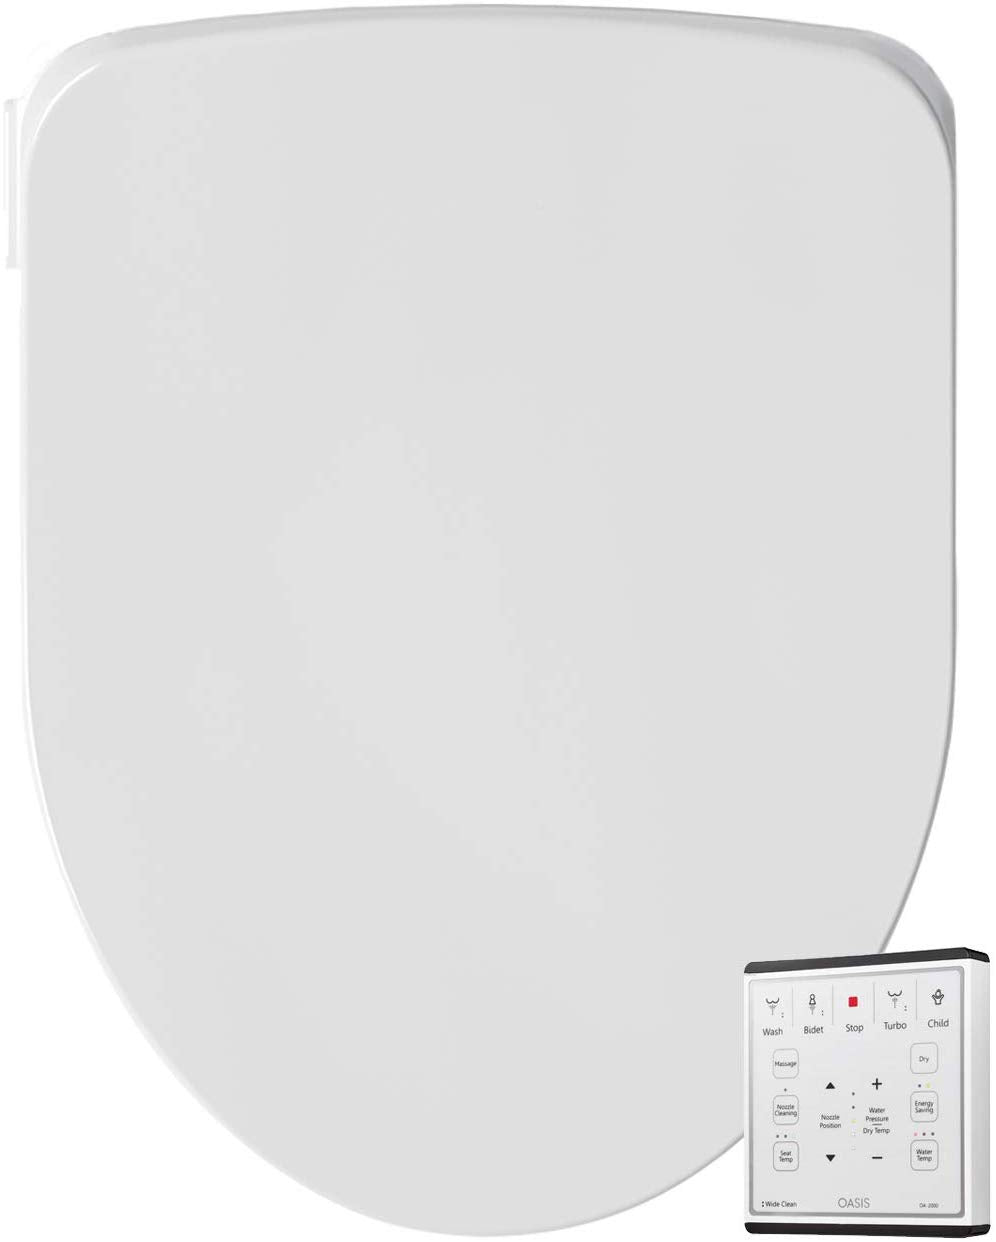 Oasis by Bio Bidet | Bidet Smart Toilet Seat in Round White with Stainless Steel Self-Cleaning Nozzle, Nightlight, Turbo Wash, Oscillating, and Fusion Warm Water Technology with Wireless Remote